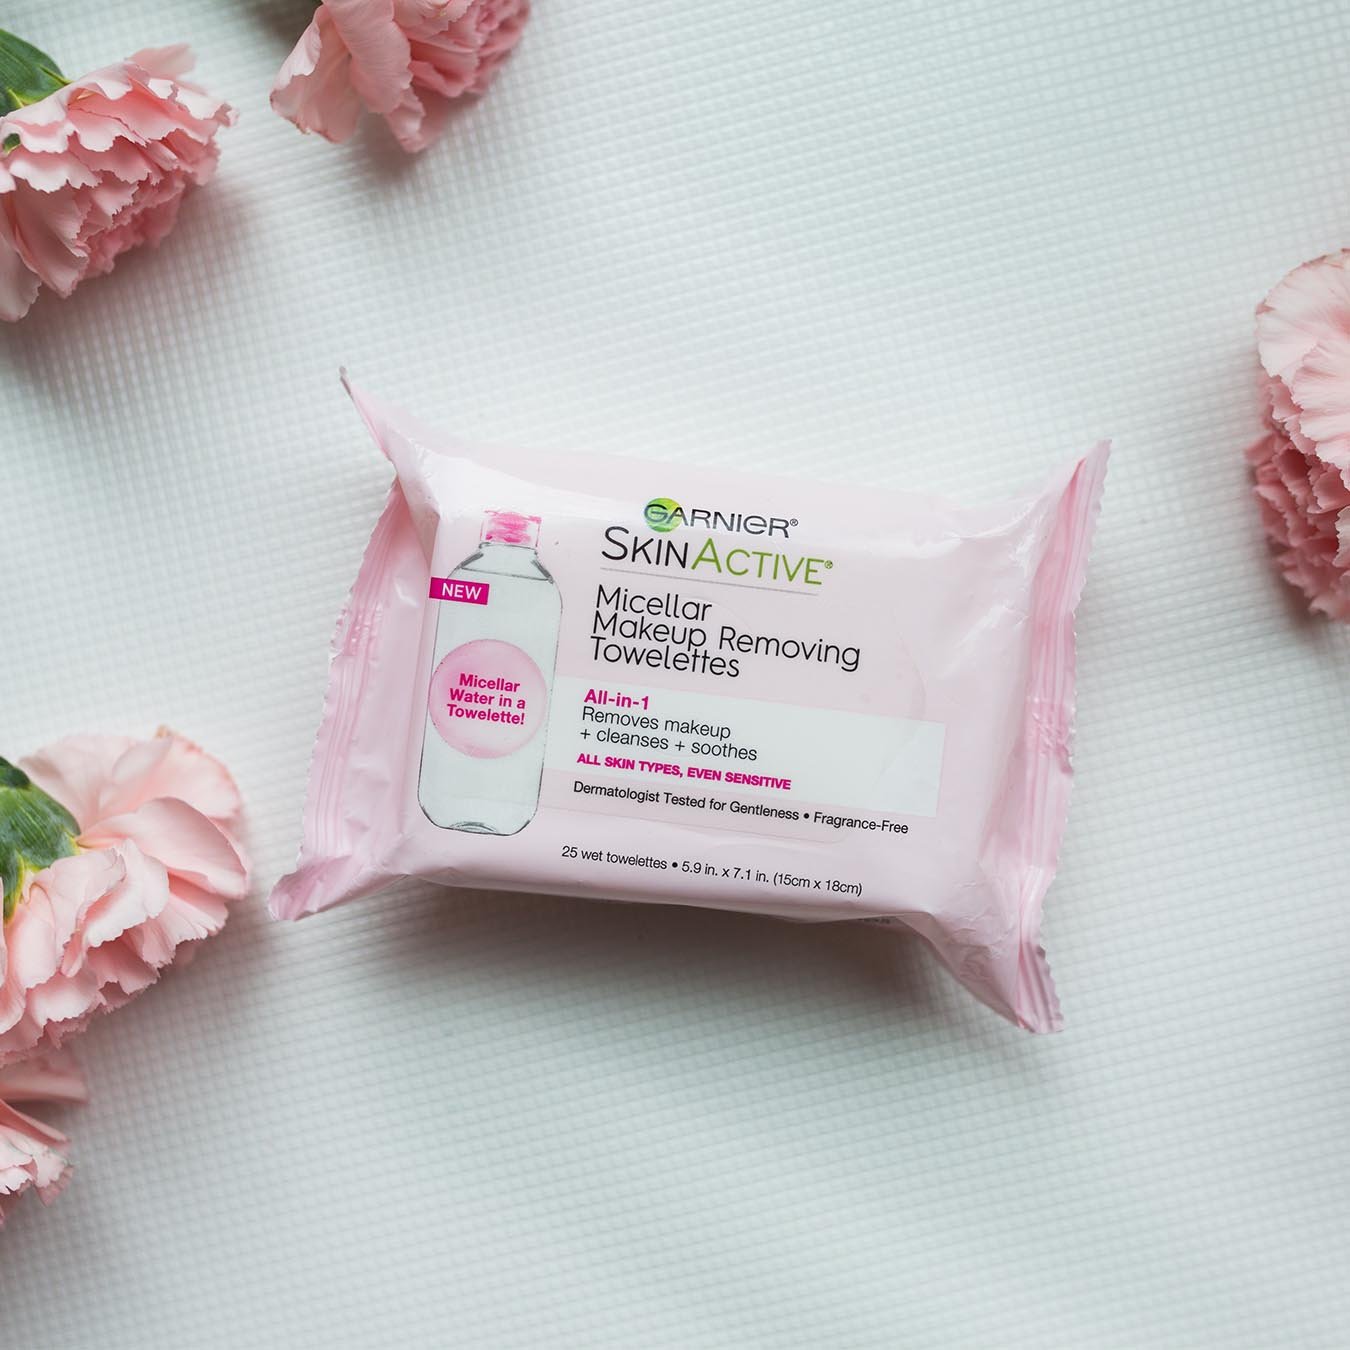 Garnier SkinActive Micellar Makeup Removing Towelettes surrounded by four pink roses on a white mat.